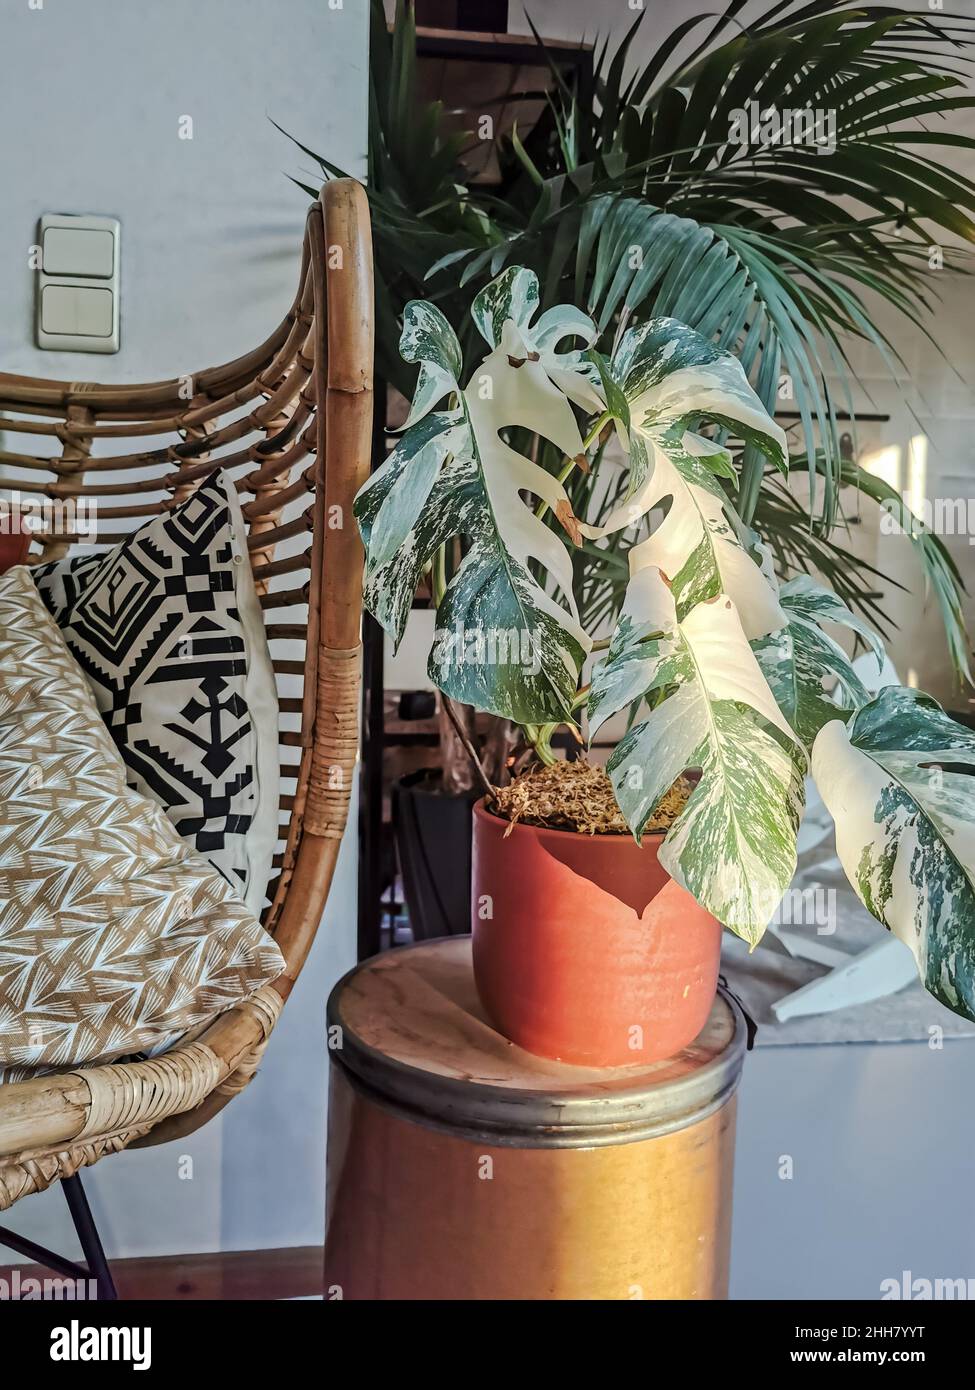 Tropical monstera albo borsigiana or variegated monstera houseplant, full plant in a boho interior. Rare and expensive plant. Stock Photo